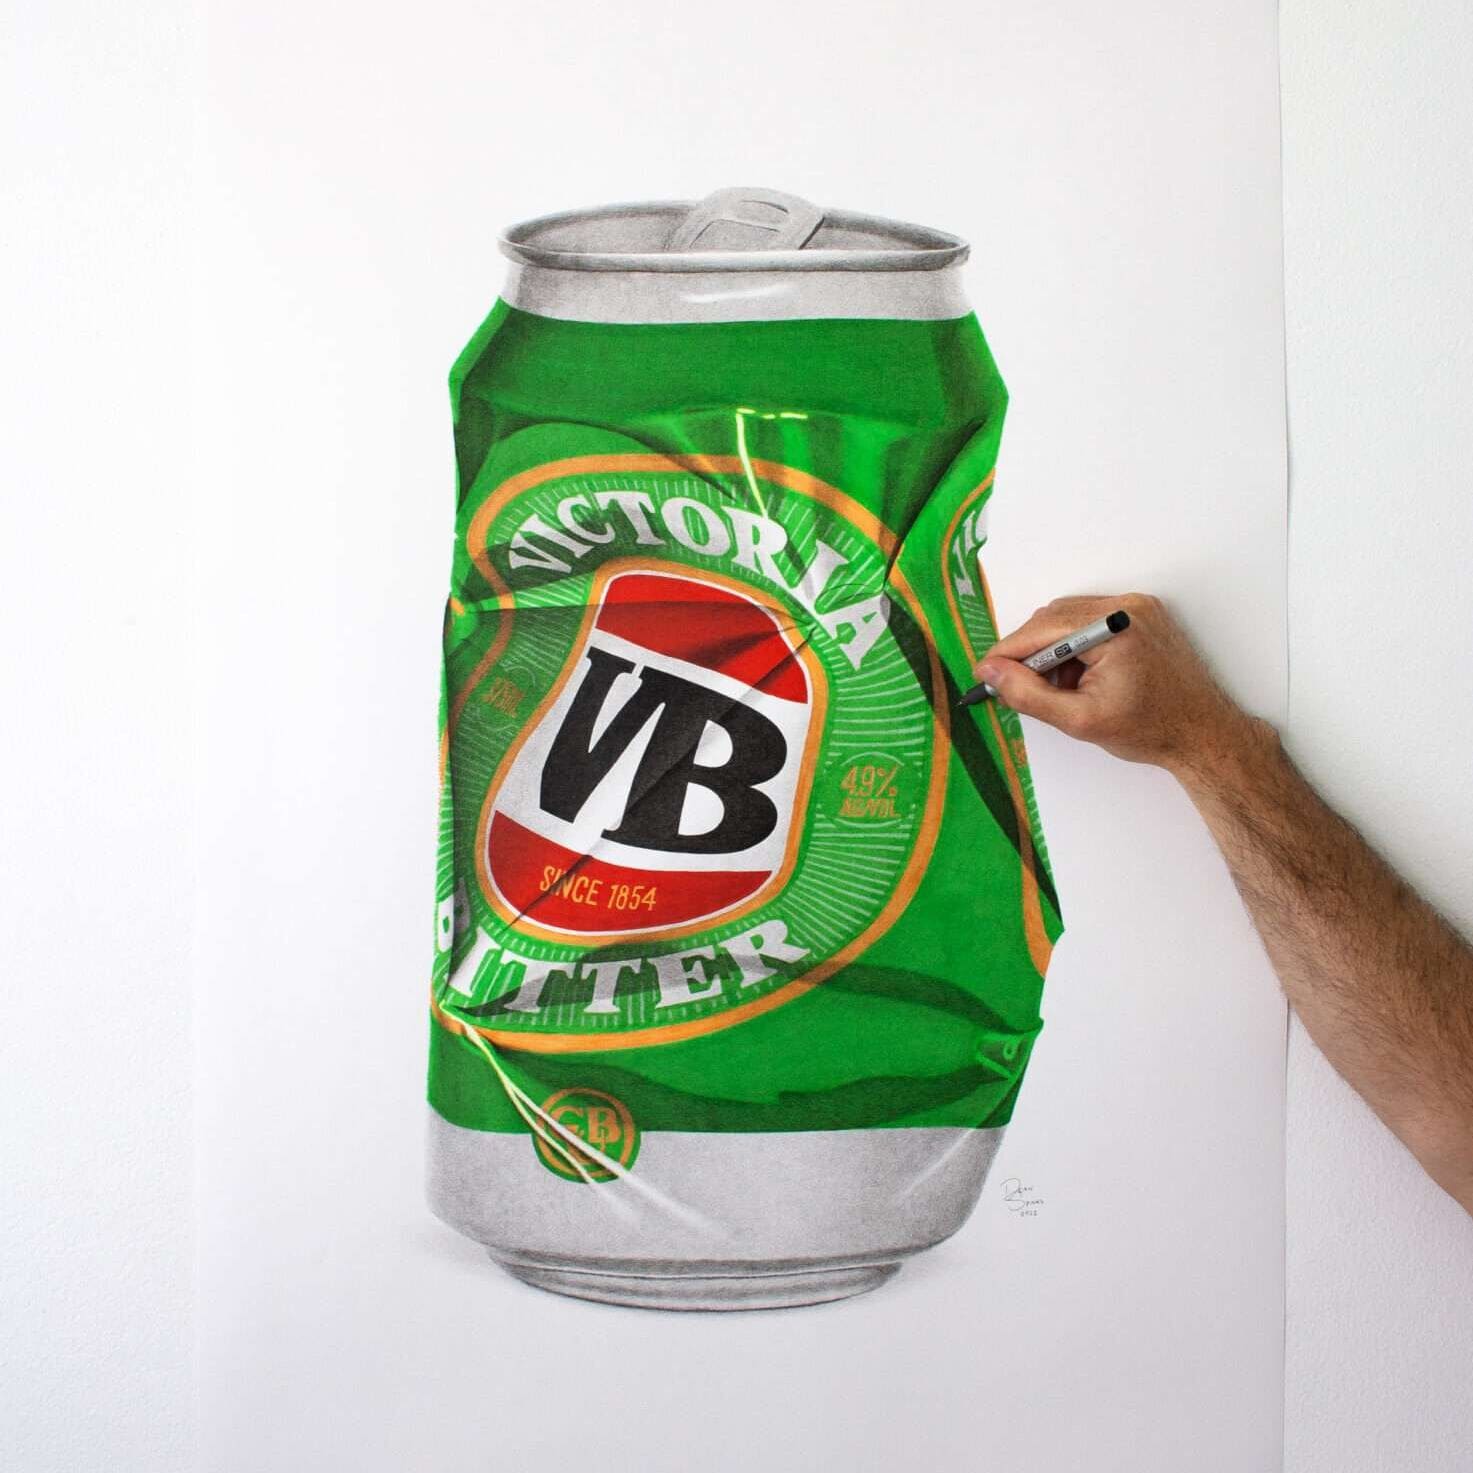 Victoria Bitter beer can hand drawn artwork